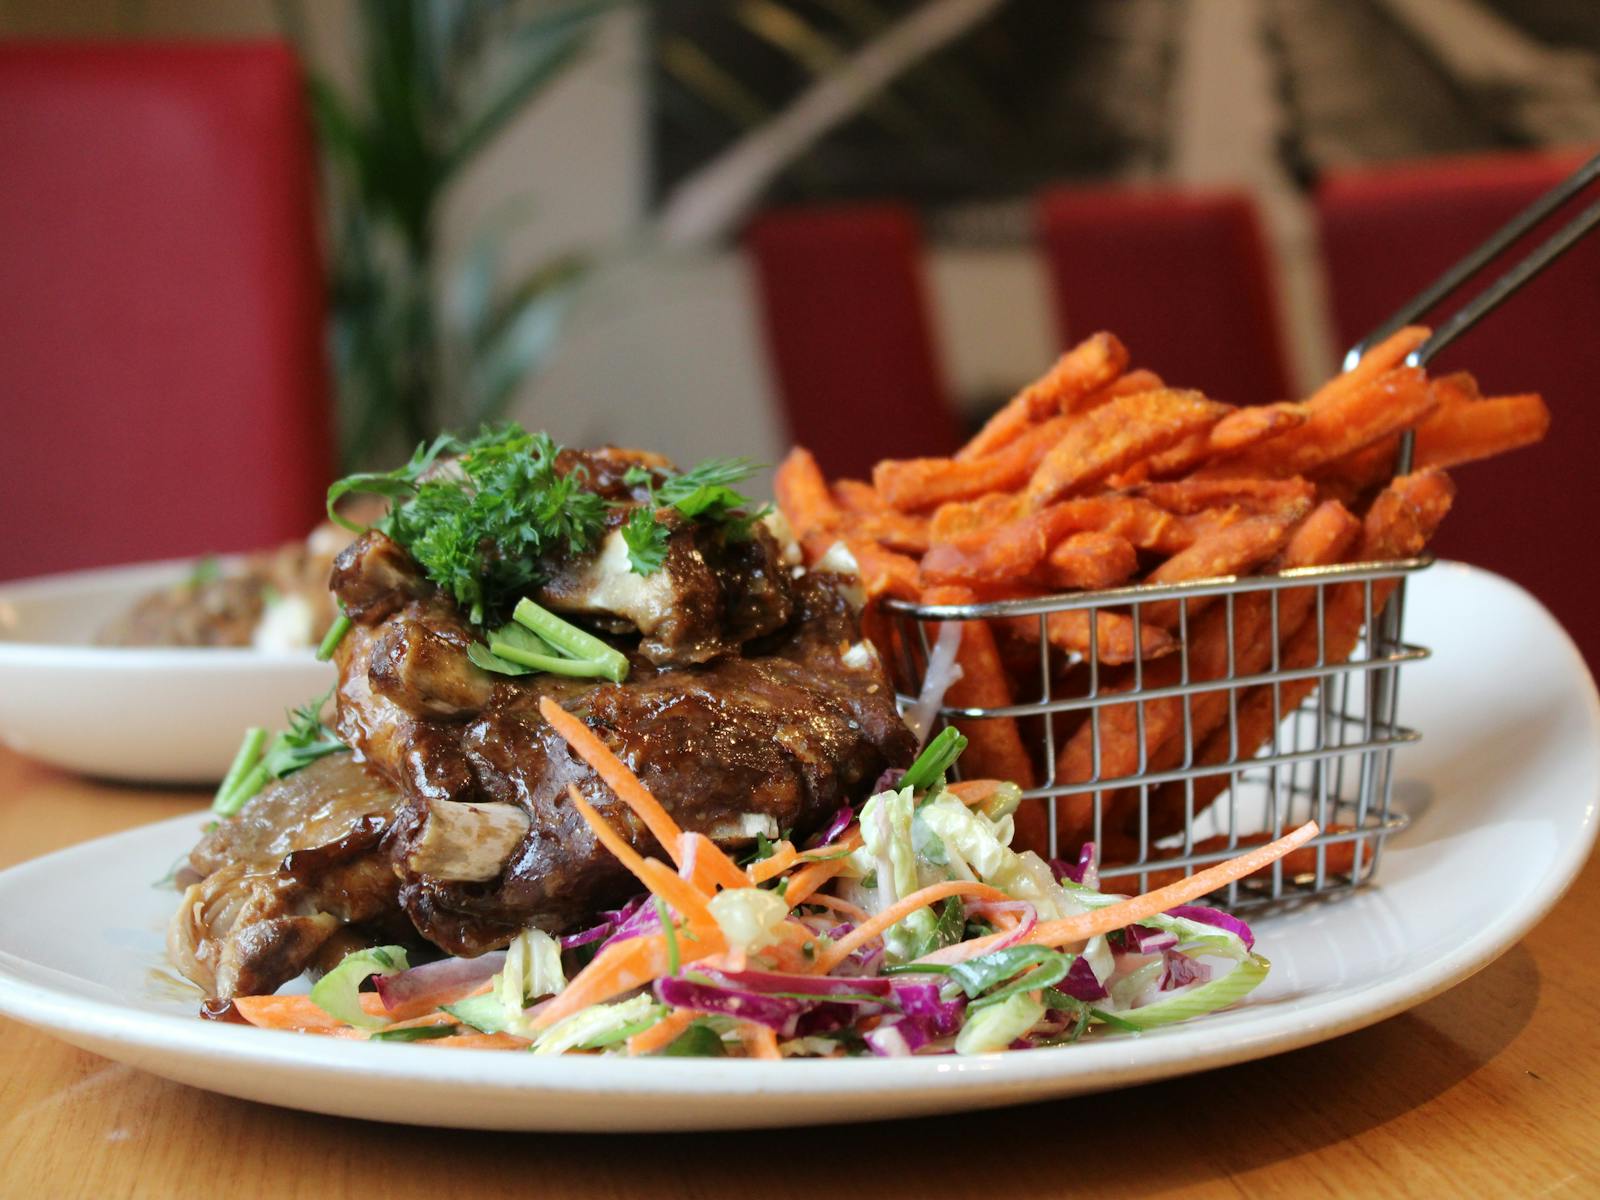 A delichious colourful meal with sweet potato fries in a wire basket, colourful salad and steak